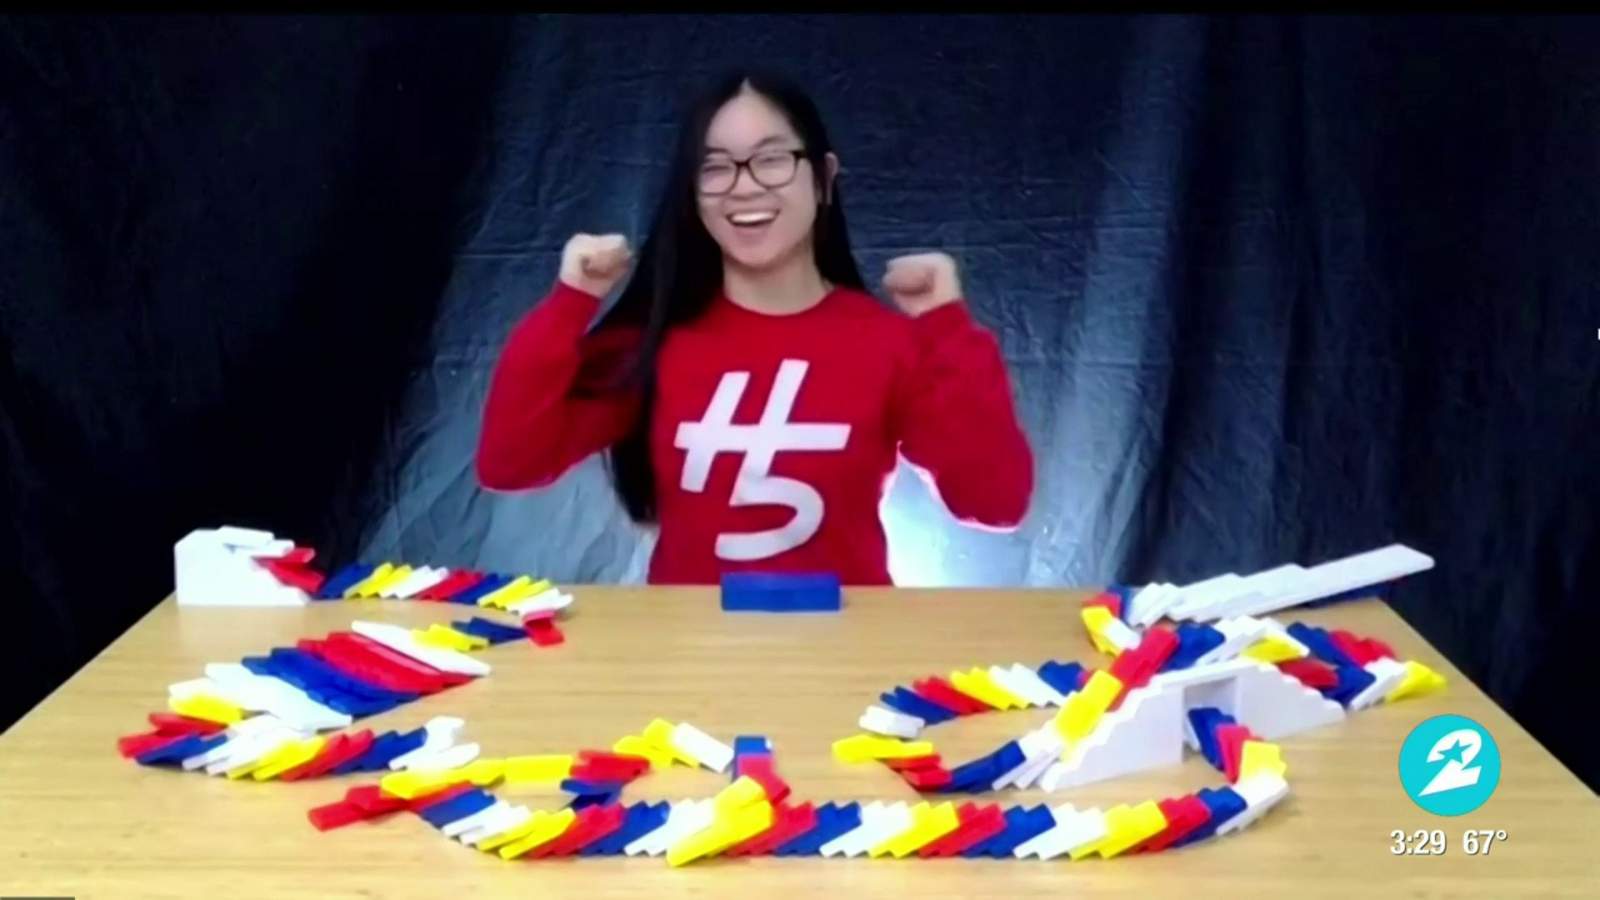 Domino artist Lily Hevesh shows off tricks and secrets to build dominoes like a pro